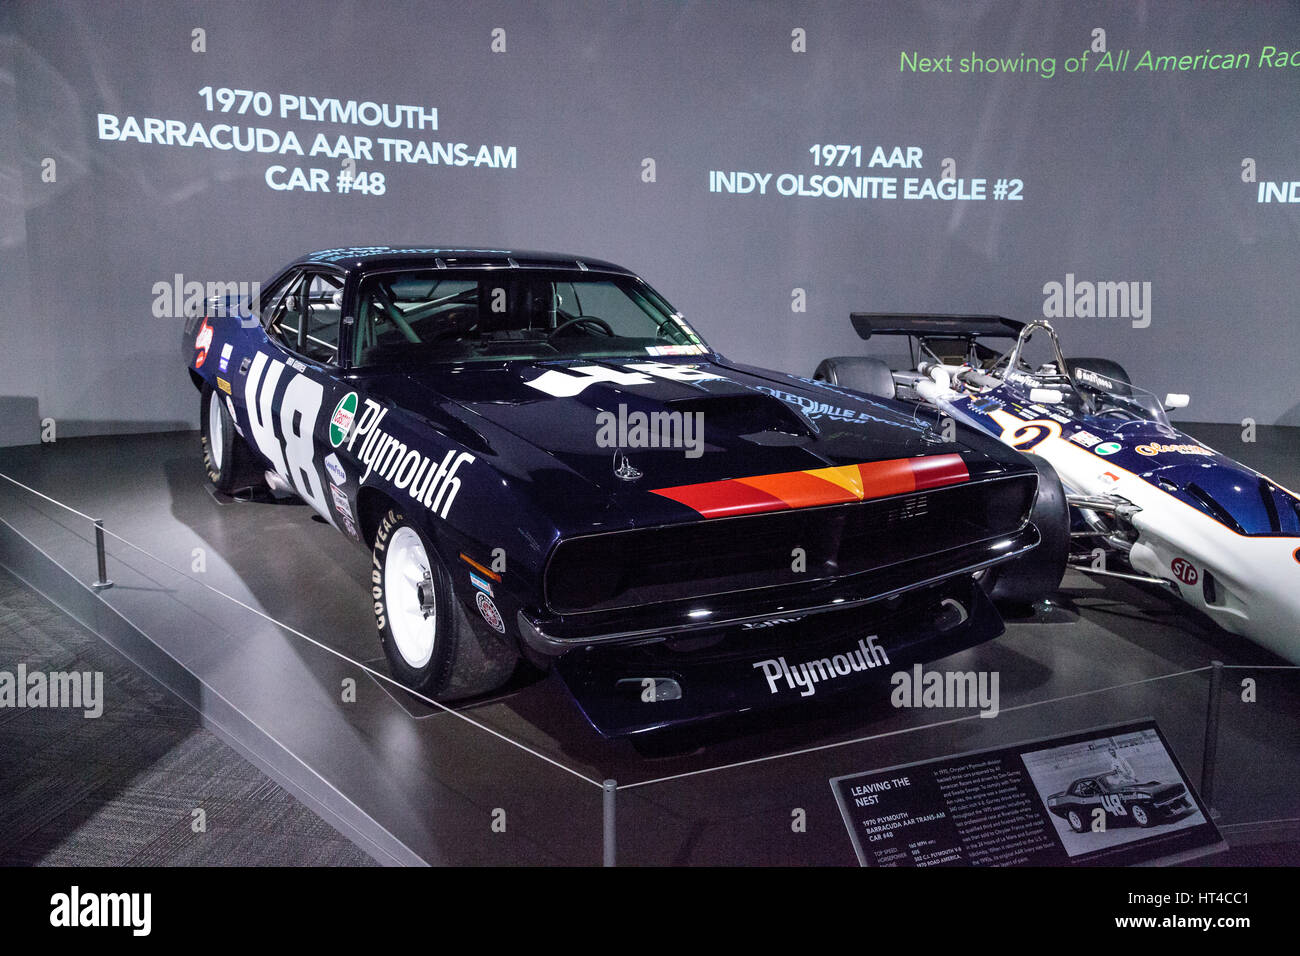 Los Angeles, CA, USA — March 4, 2017: Black 1970 Plymouth Barracuda AAR Trans-Am car number 48 at the Petersen Automotive Museum in Los Angeles, Calif Stock Photo